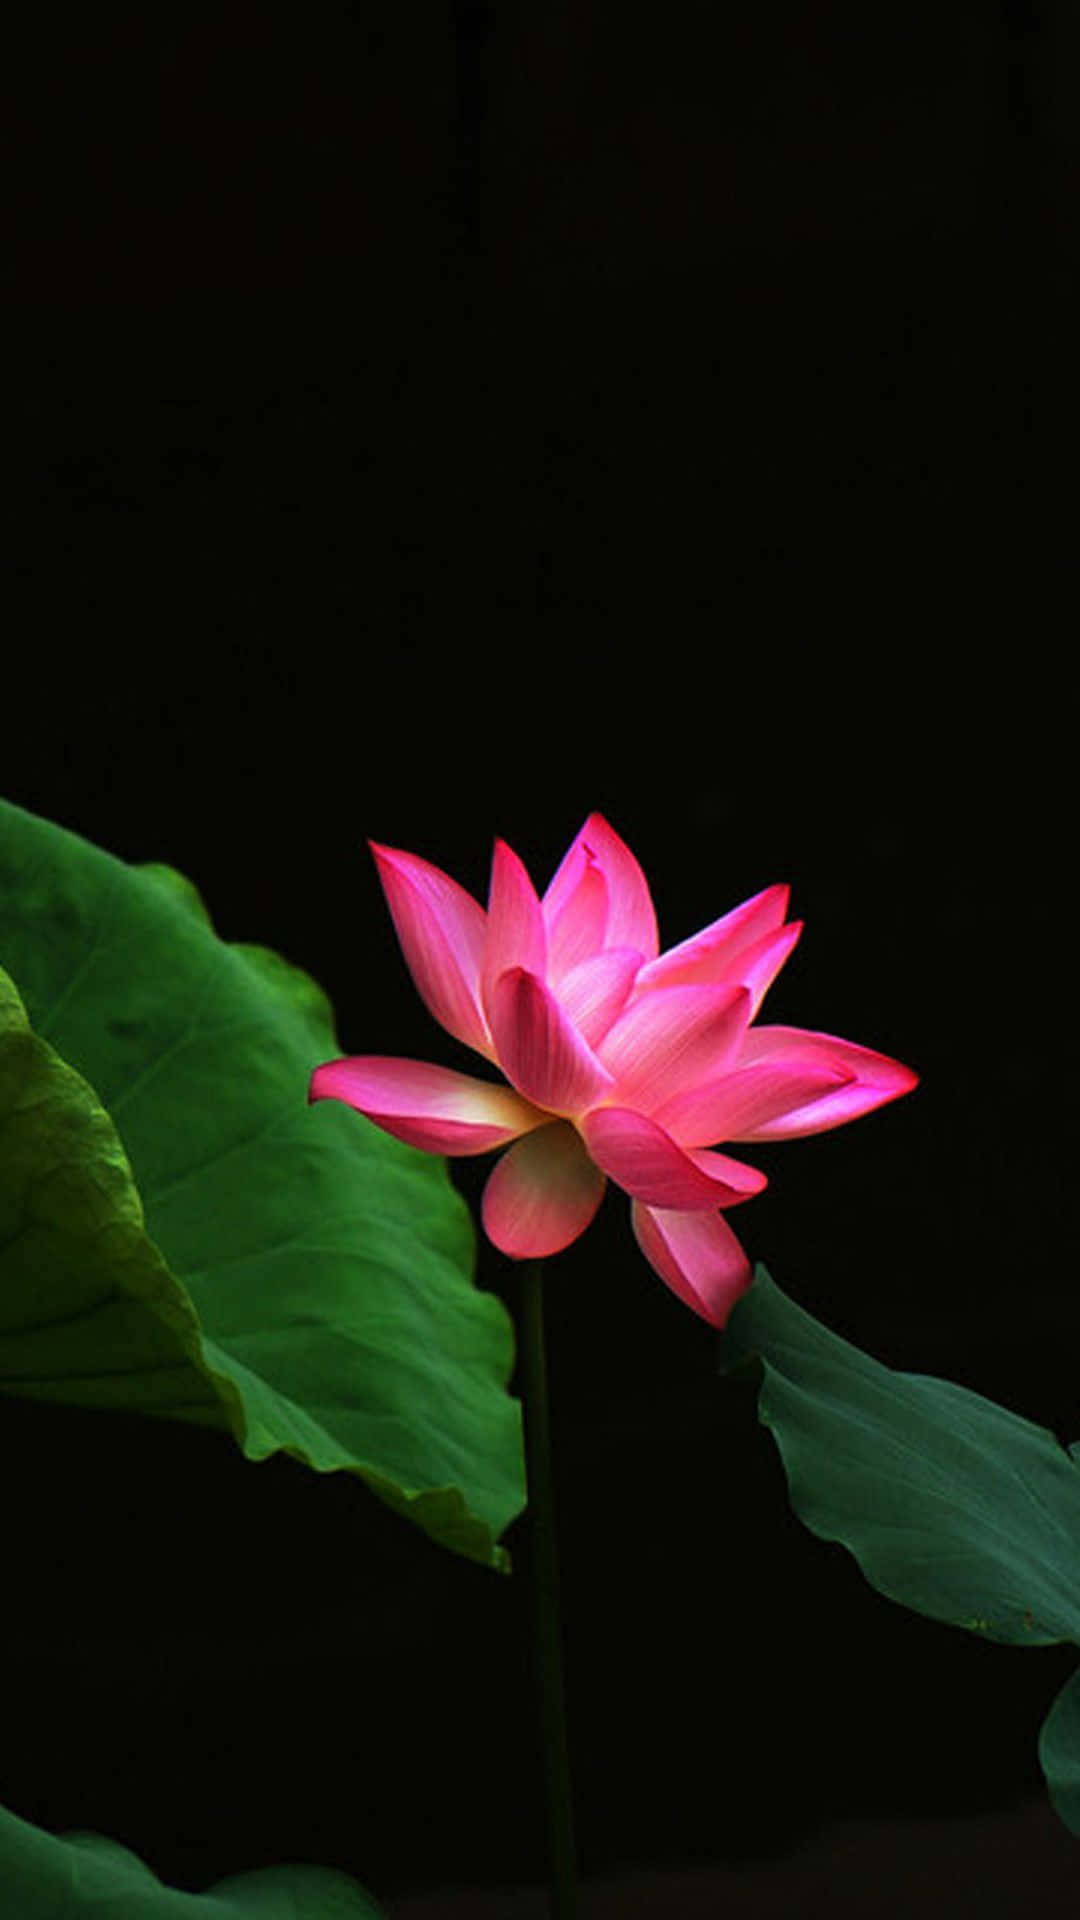 The gorgeousness of a pink lotus flower in full bloom